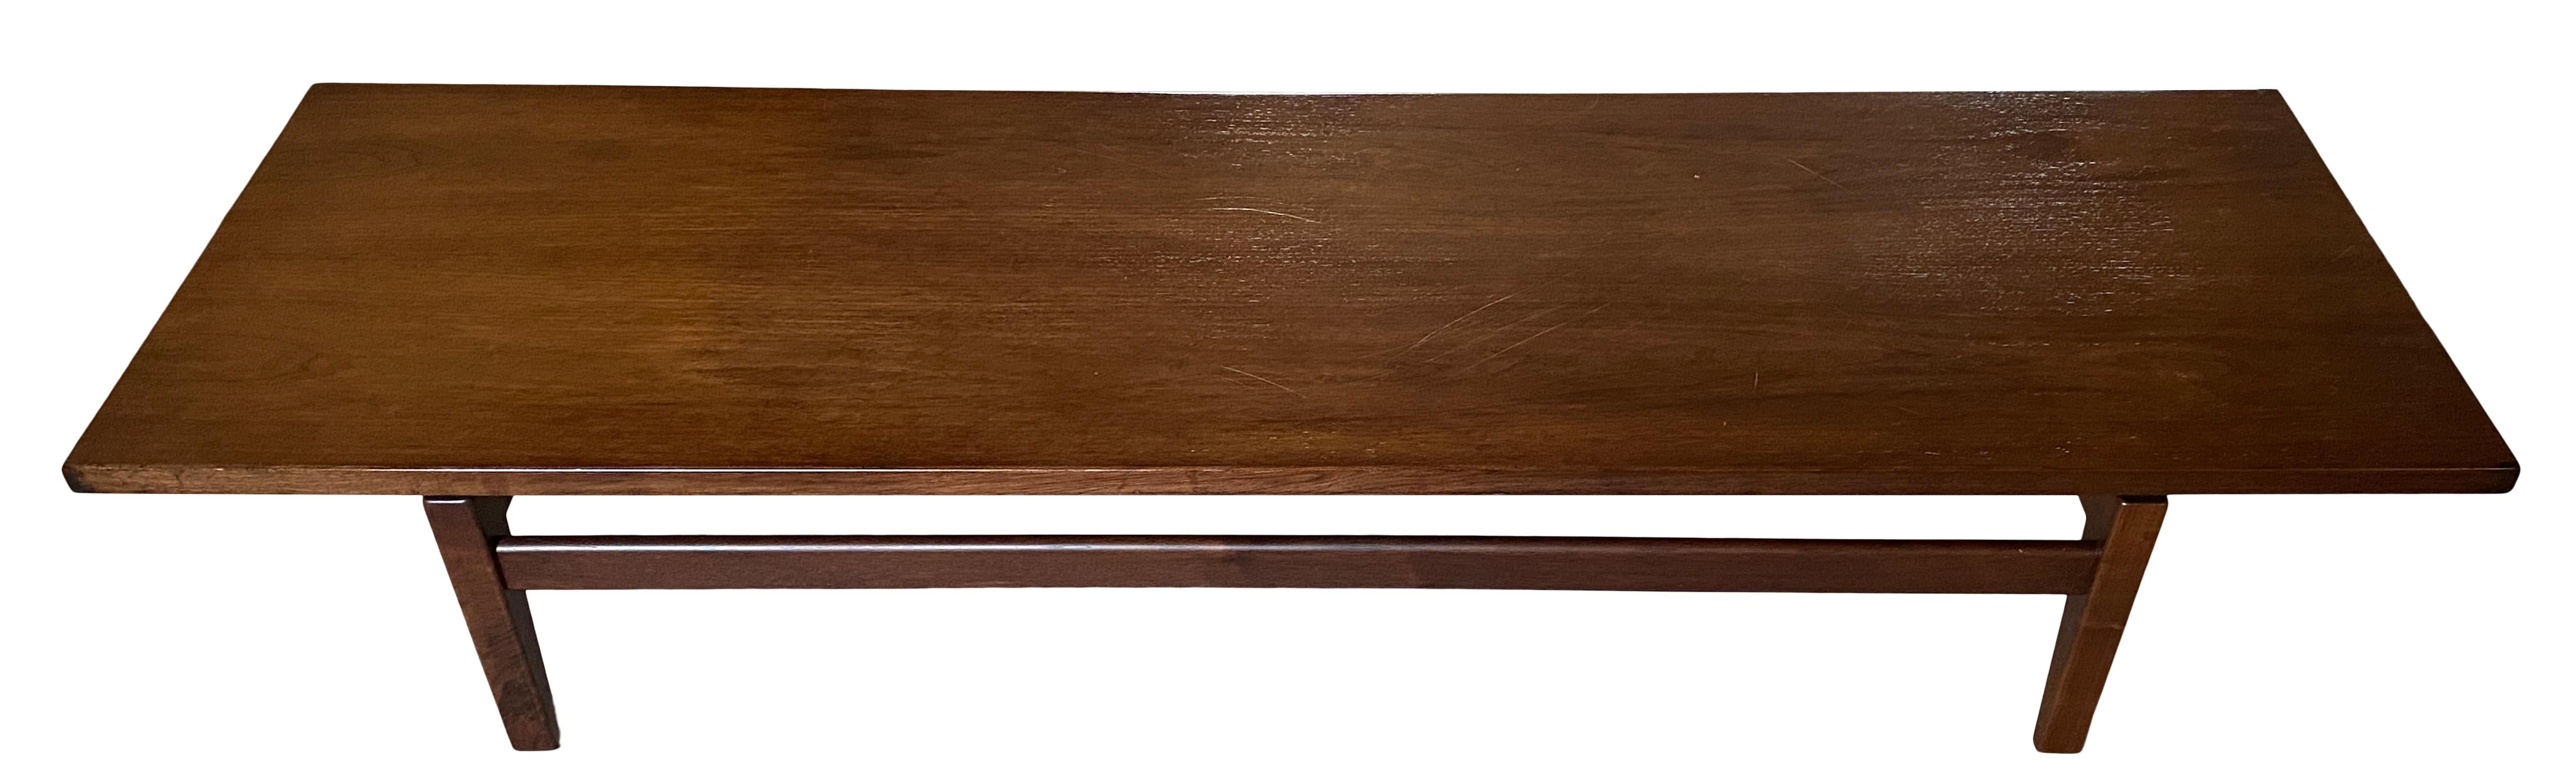 Midcentury Jens Risom design 6’ long walnut floating coffee table bench. Beautiful design and shape. Has floating top design coffee table top. Labeled Jens Risom Design. Great refinished condition, very solid and sturdy, can be used as a coffee